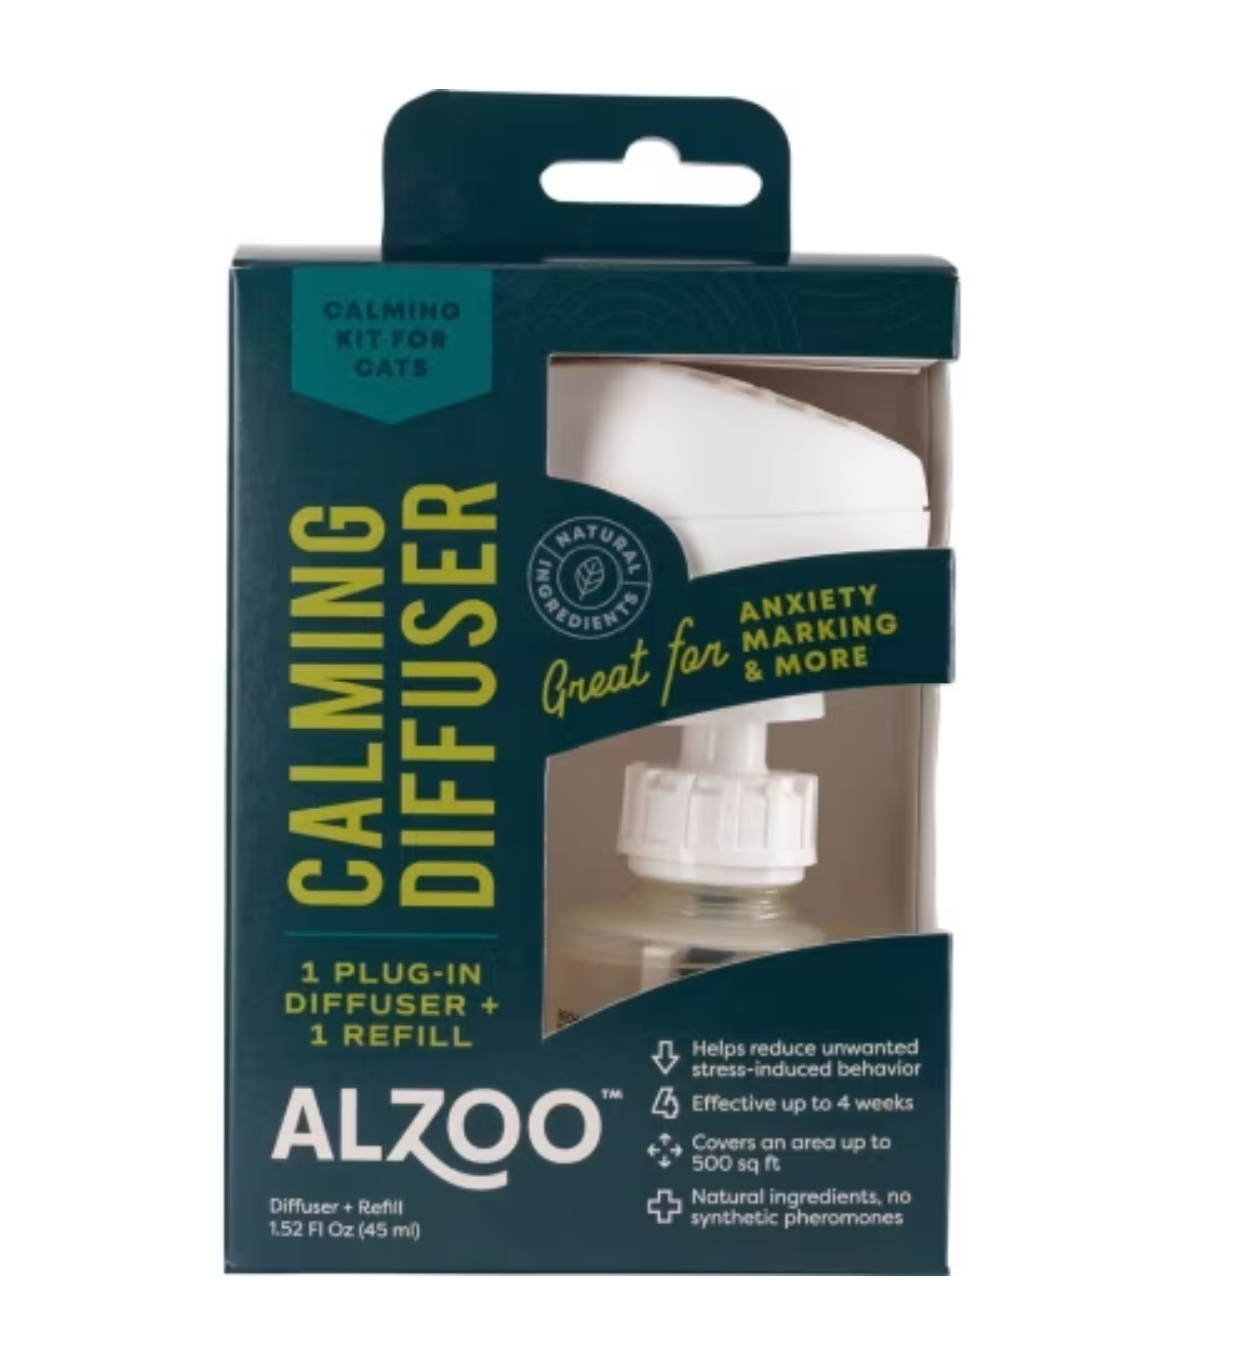 Alzoo Plant Based Calming Diffuser for Cats